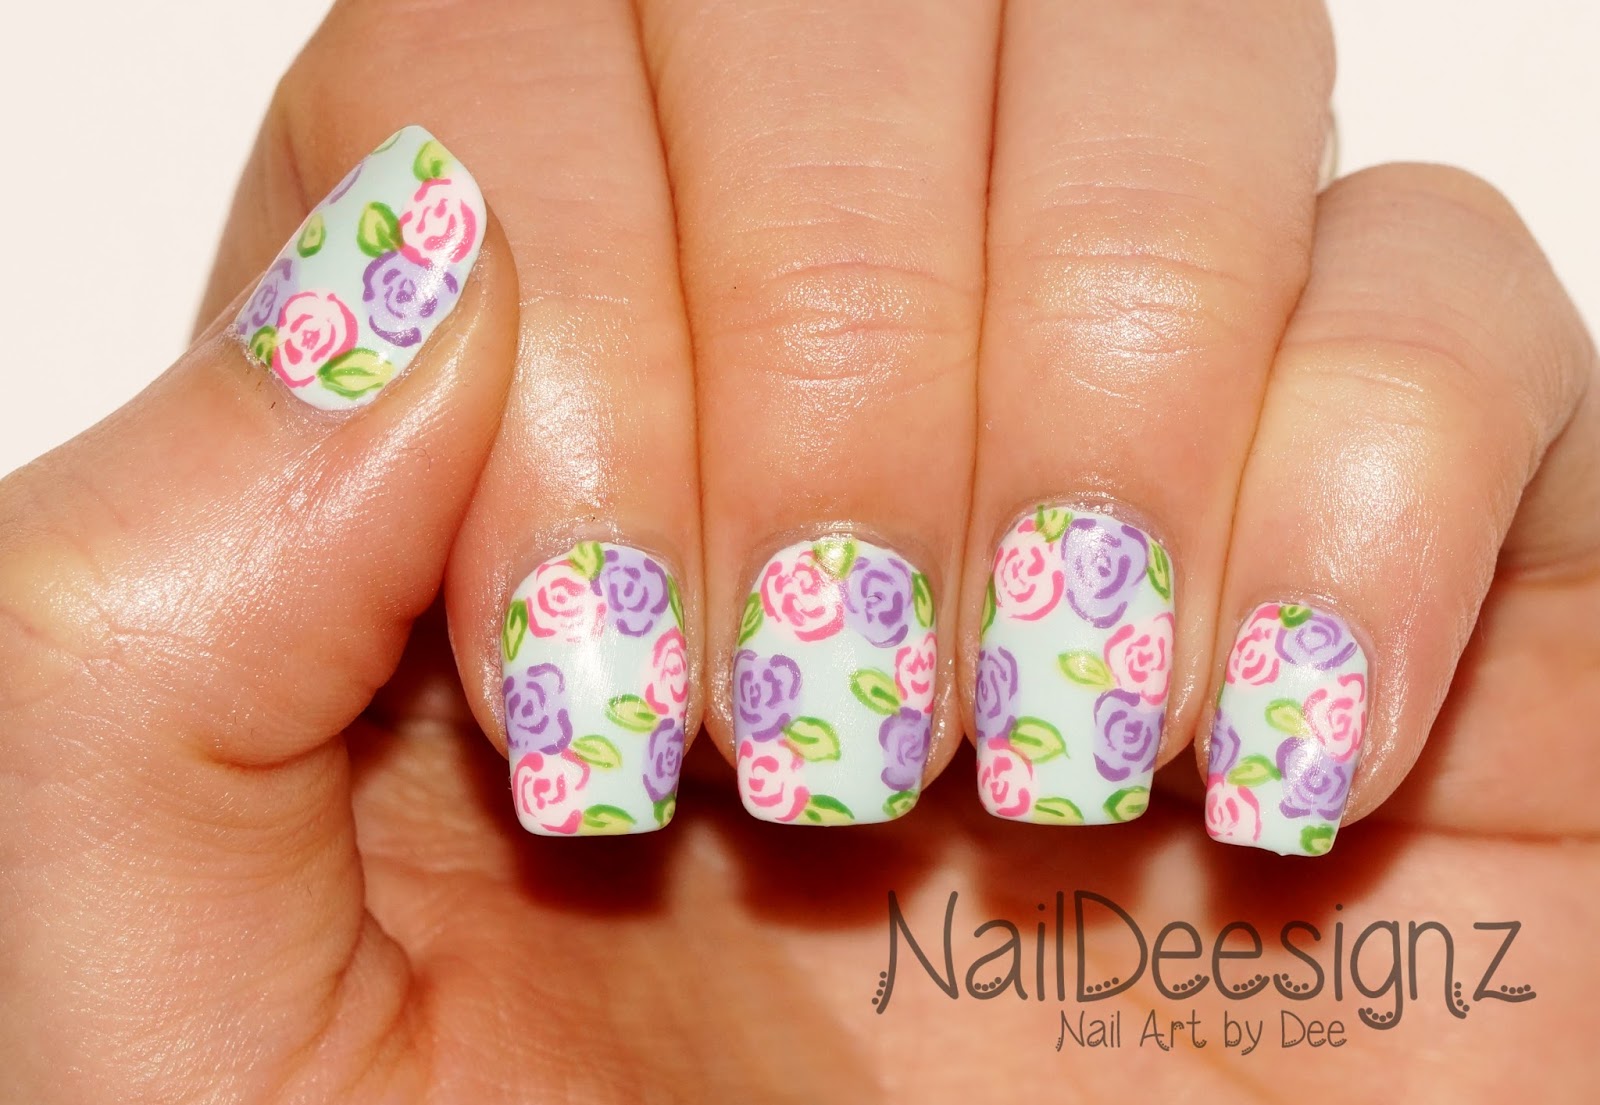 6. 2 Floral Nail Art Designs for Spring - wide 1